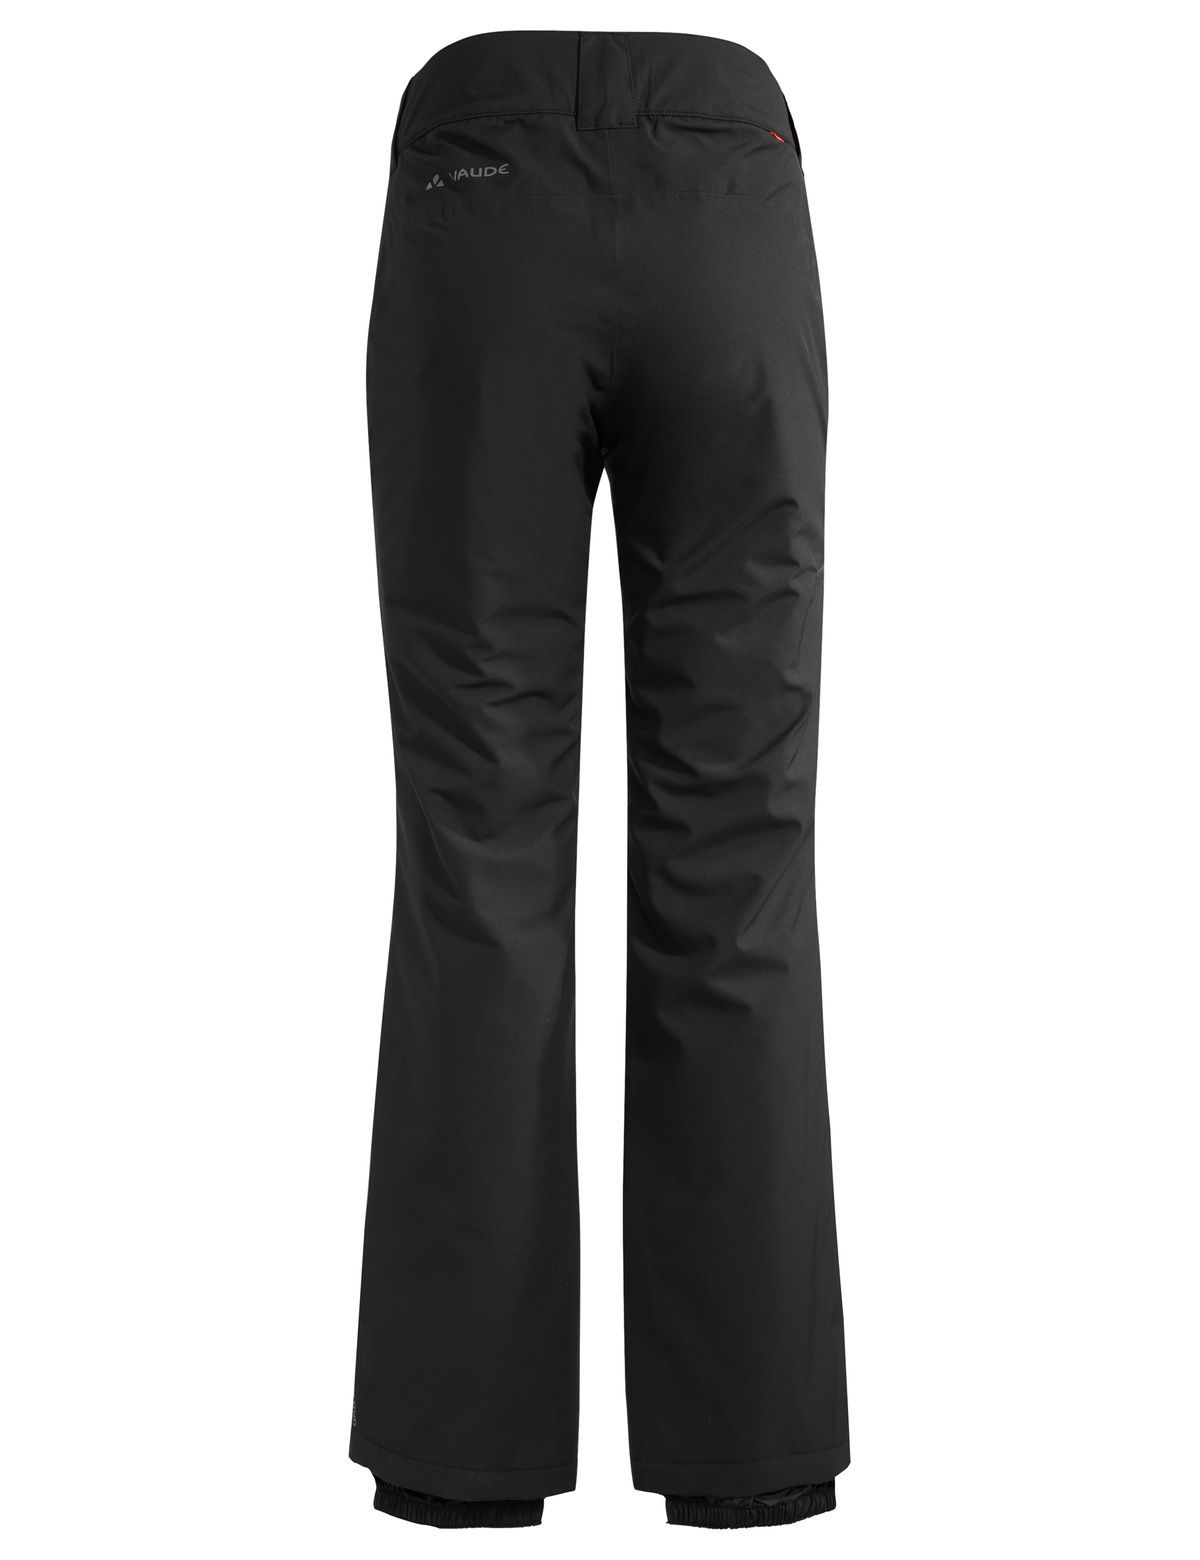 Vaude W's Strathcona Padded Trousers - Recycled Polyester Black Pants